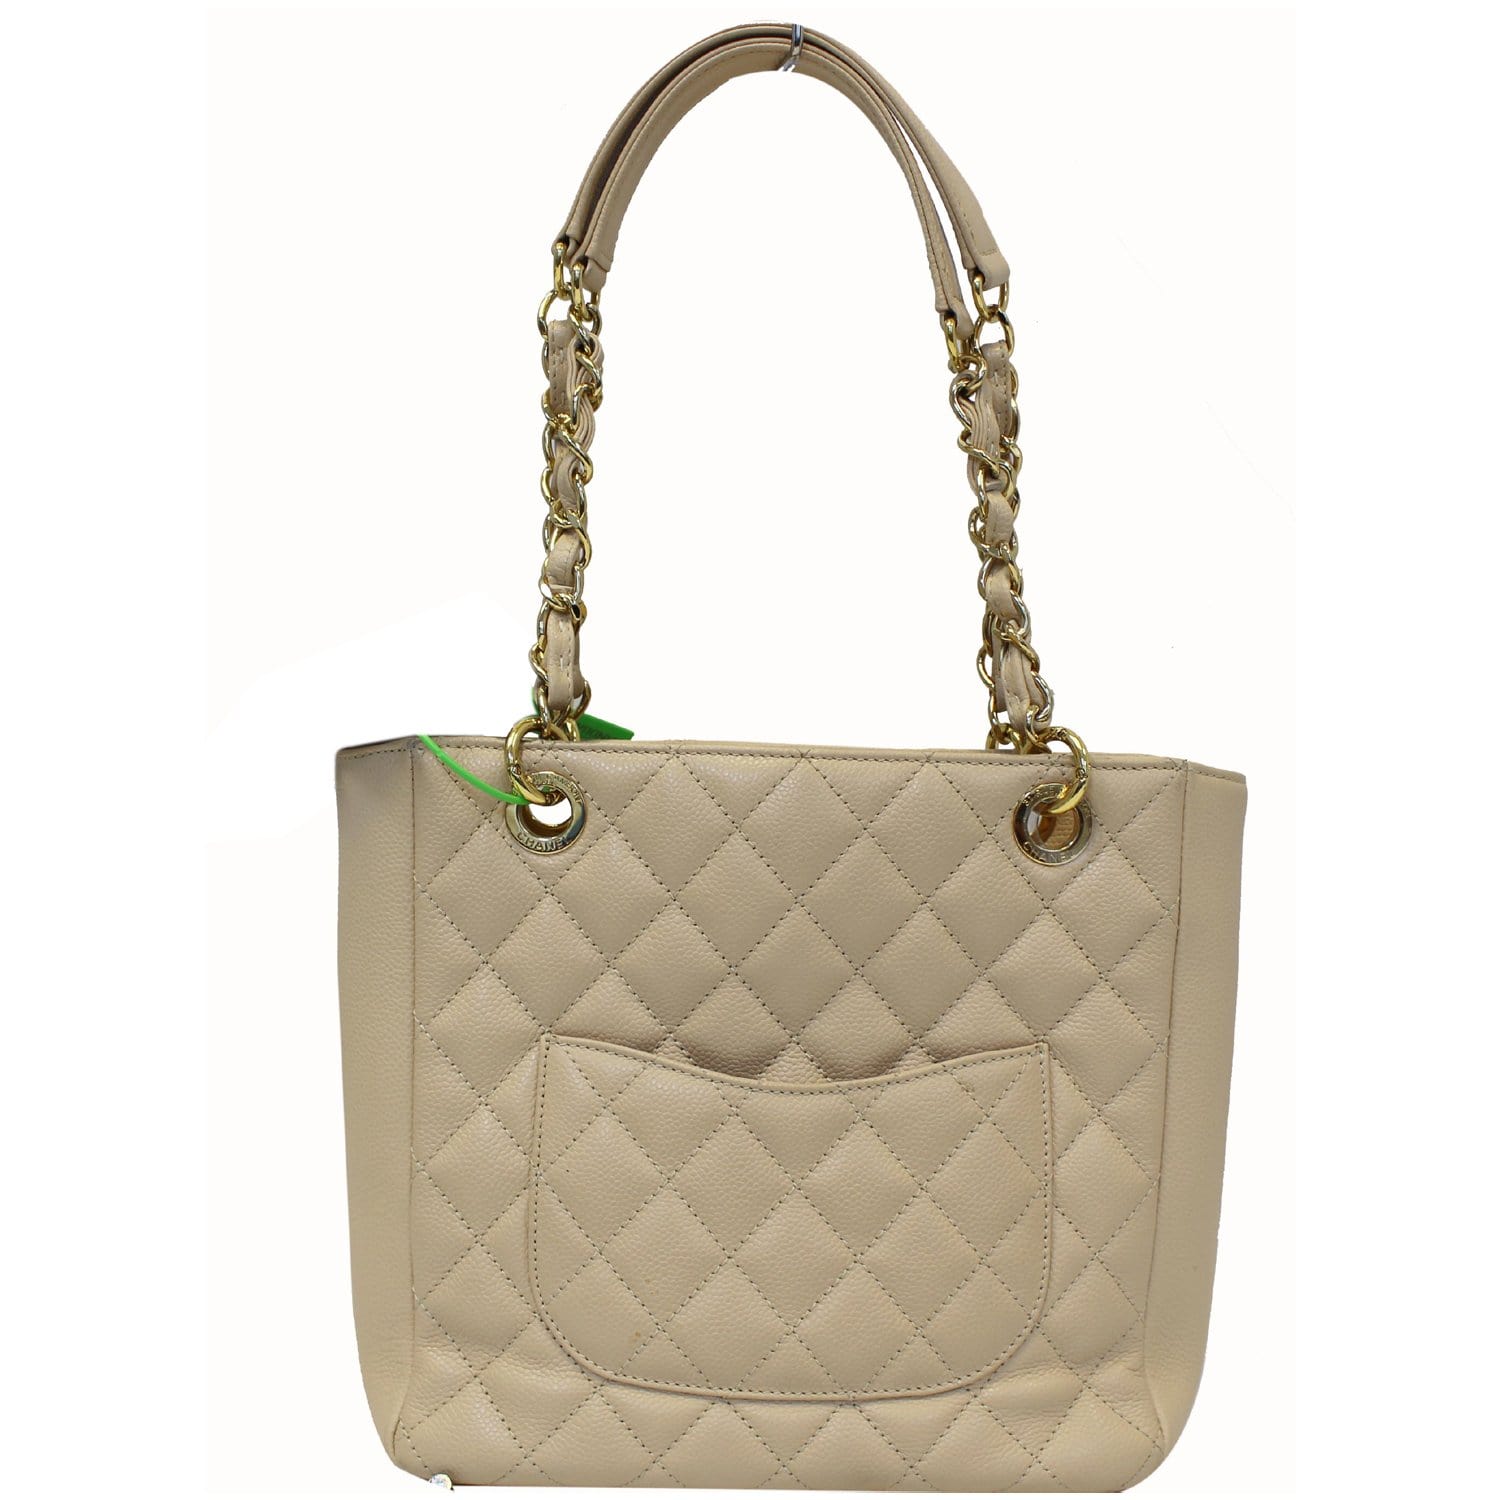 Chanel Tote Bag PST Caviar Leather Petit Shopping Beige